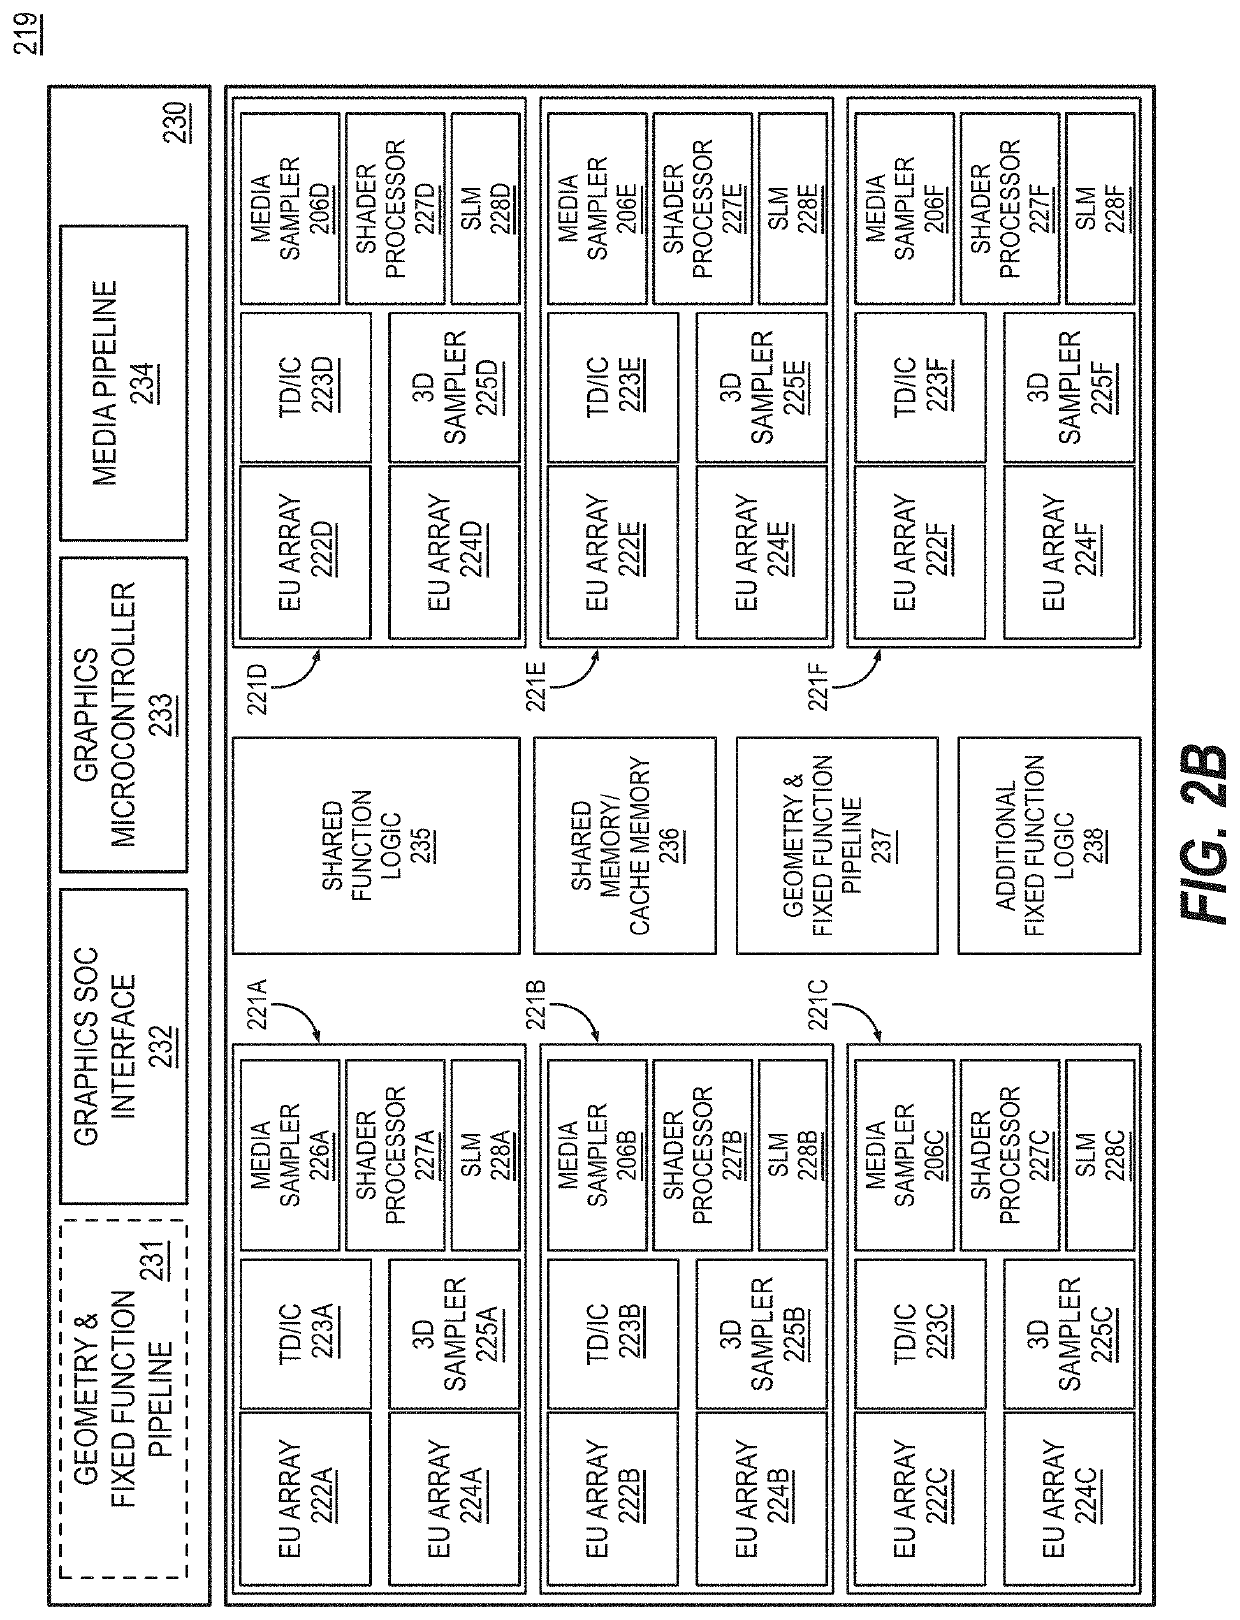 Variable width interleaved coding for graphics processing